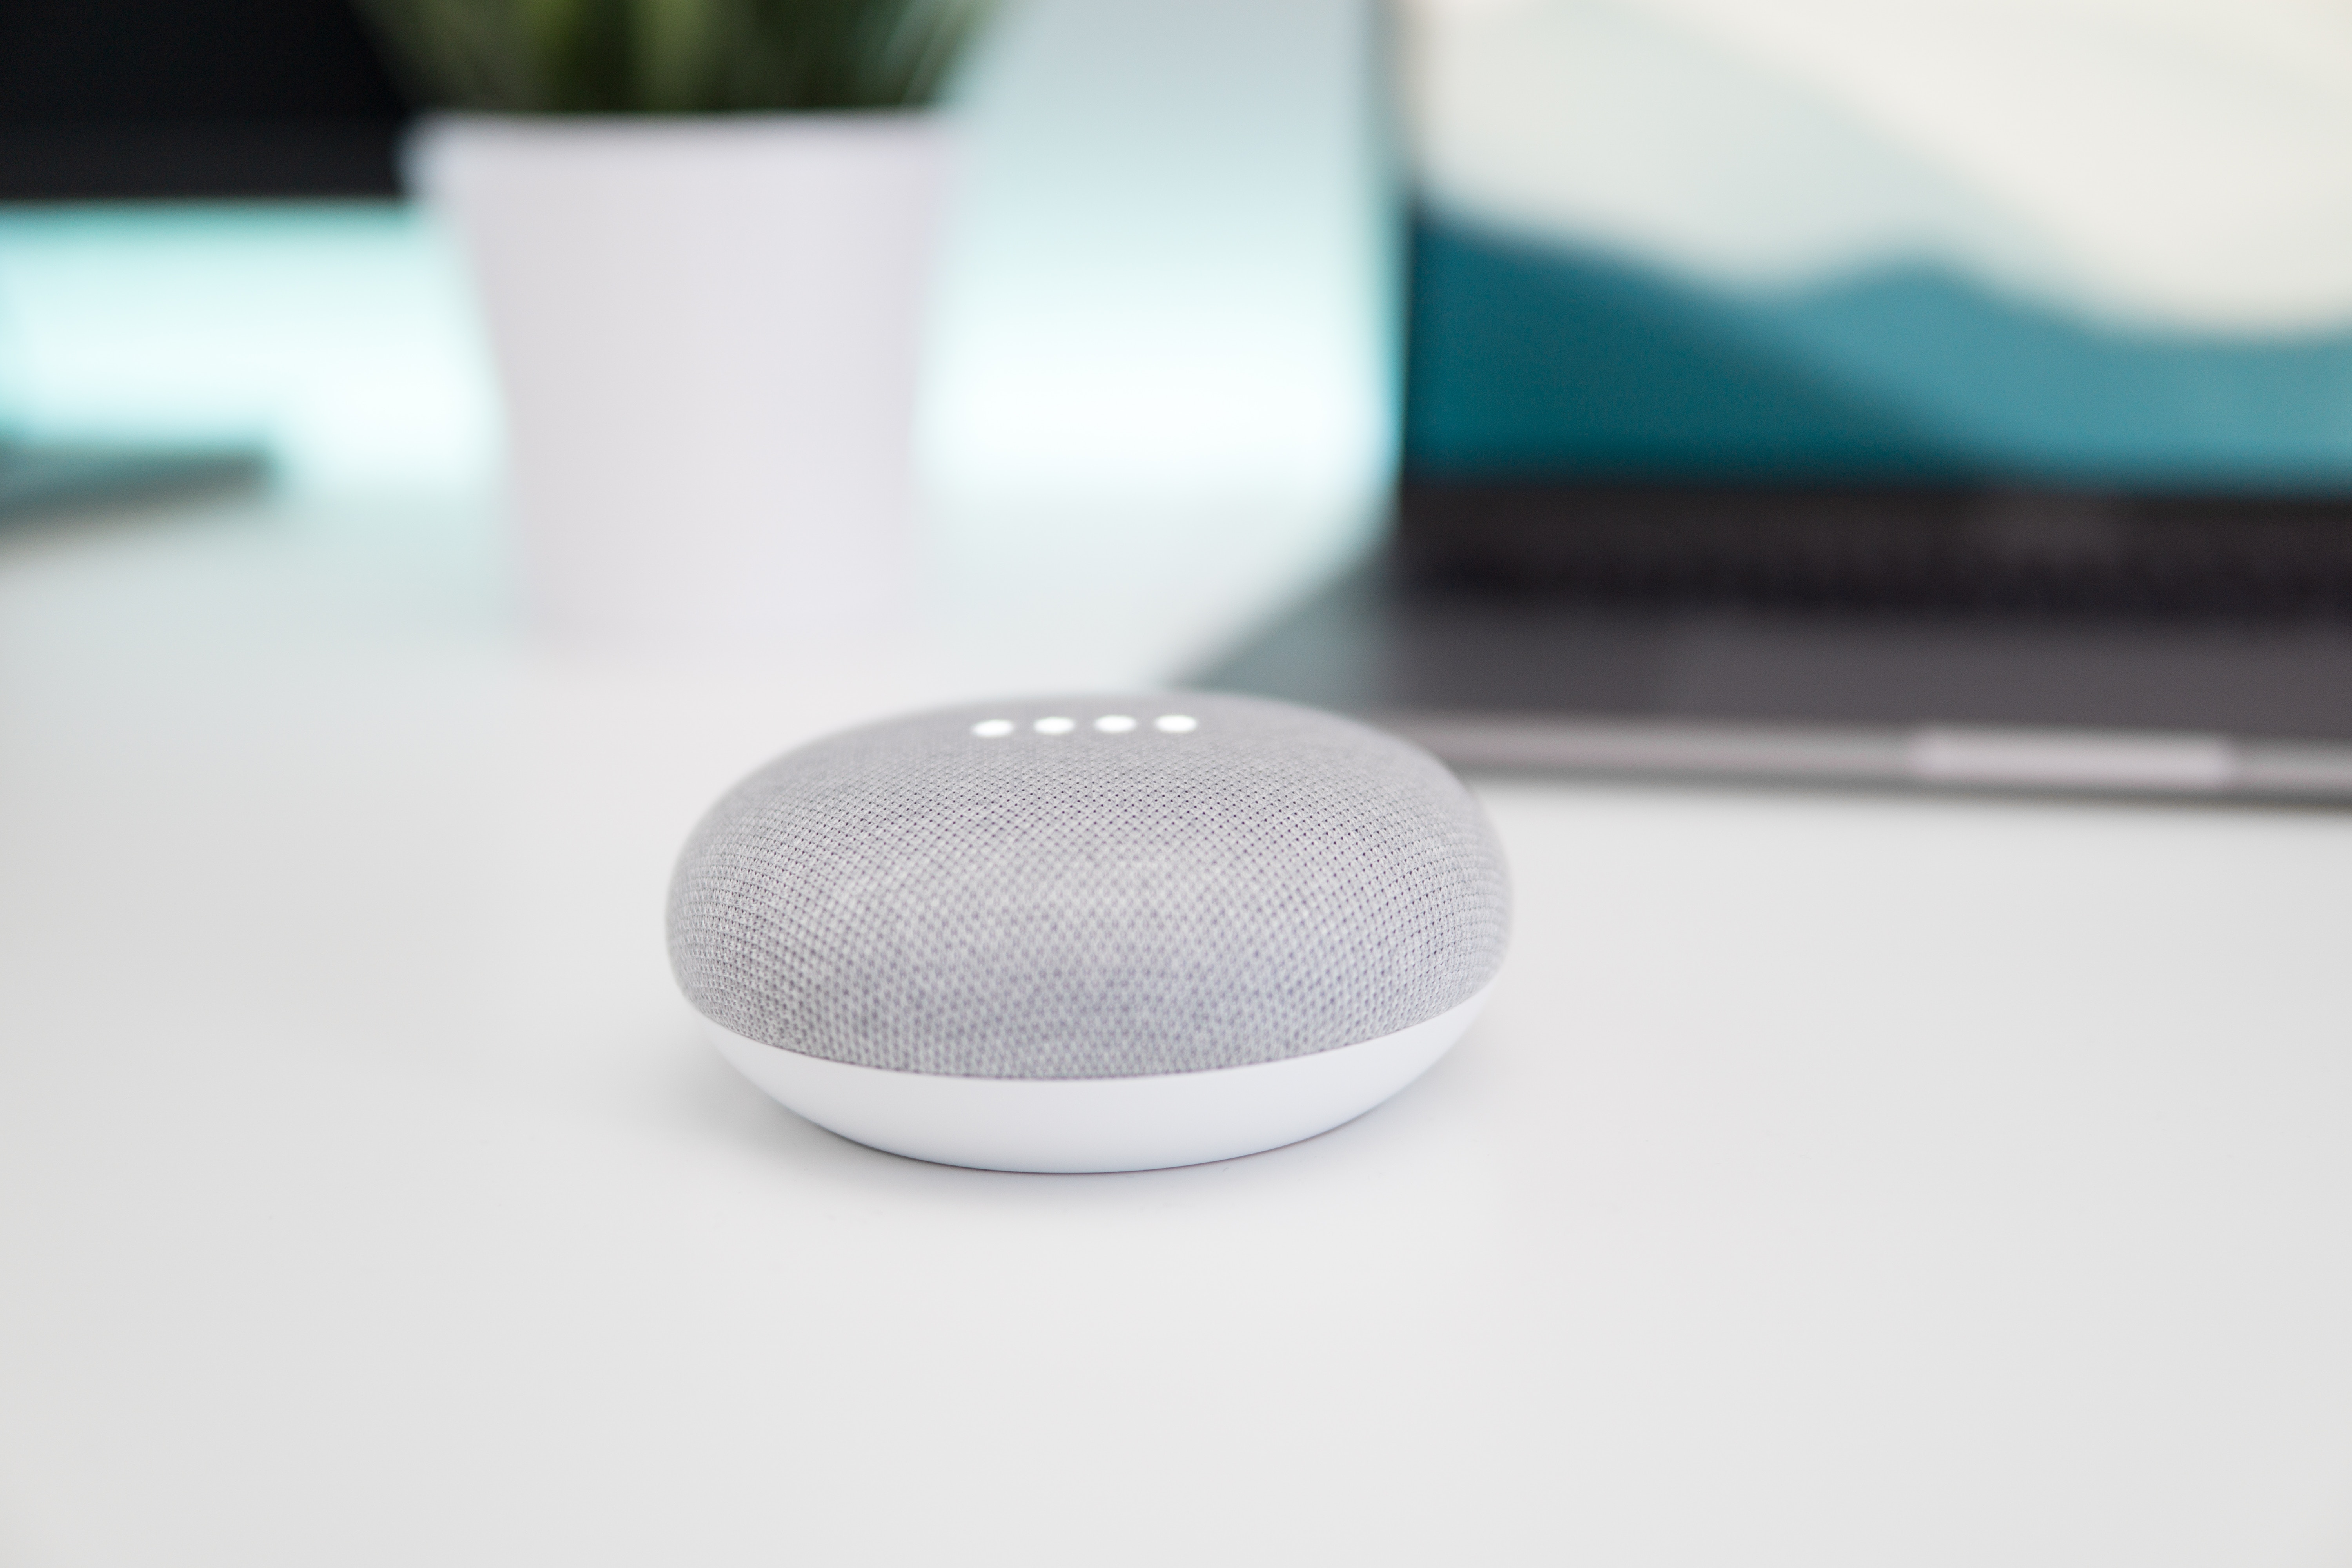 The google smart speaker with four lights on top